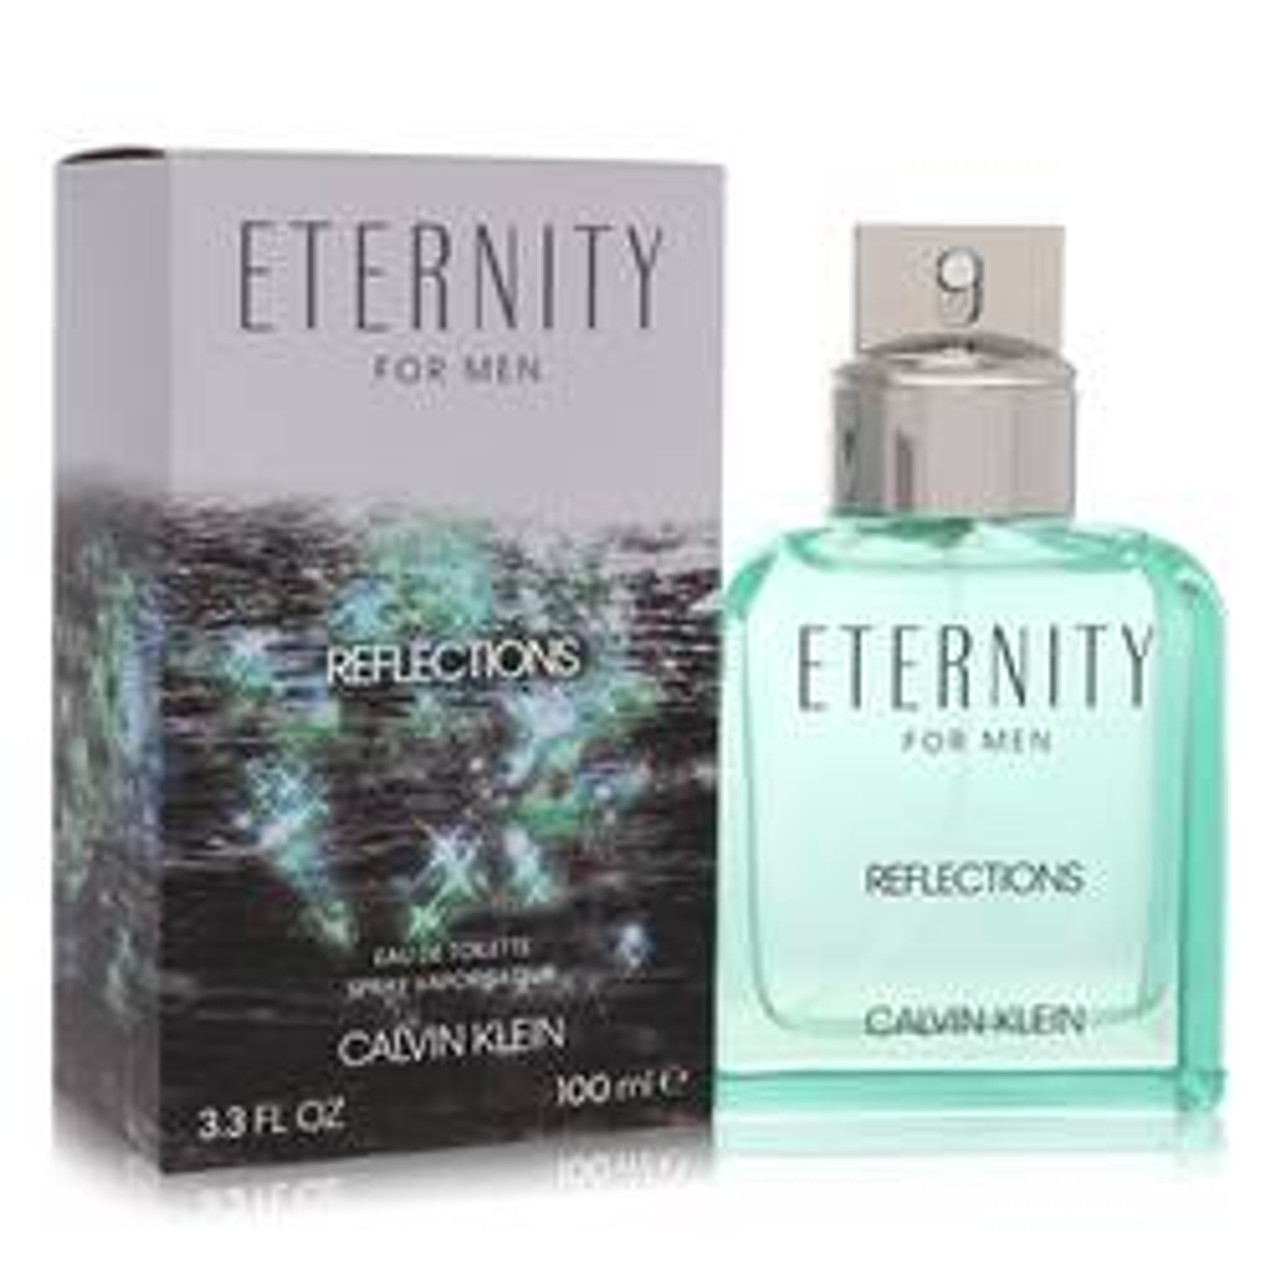 Eternity Reflections Cologne By Calvin Klein Eau De Toilette Spray 3.4 oz for Men - [From 112.00 - Choose pk Qty ] - *Ships from Miami